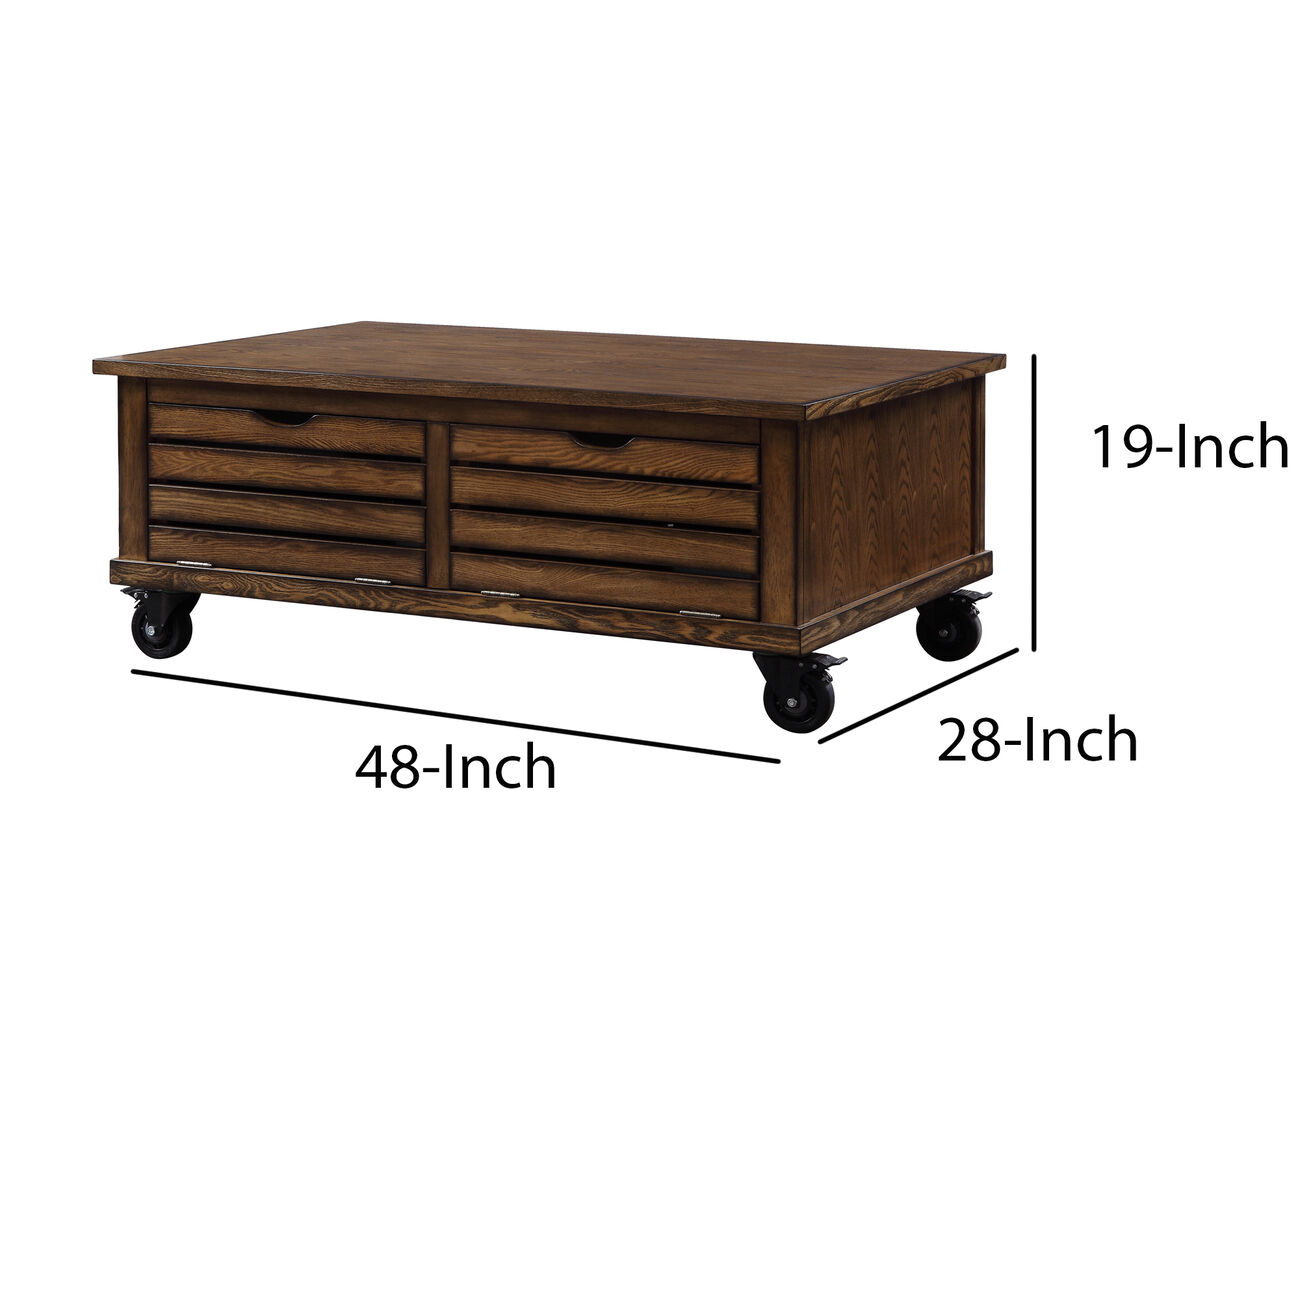 Wooden Coffee Table with Drop Down Storage and Caster Wheels, Brown